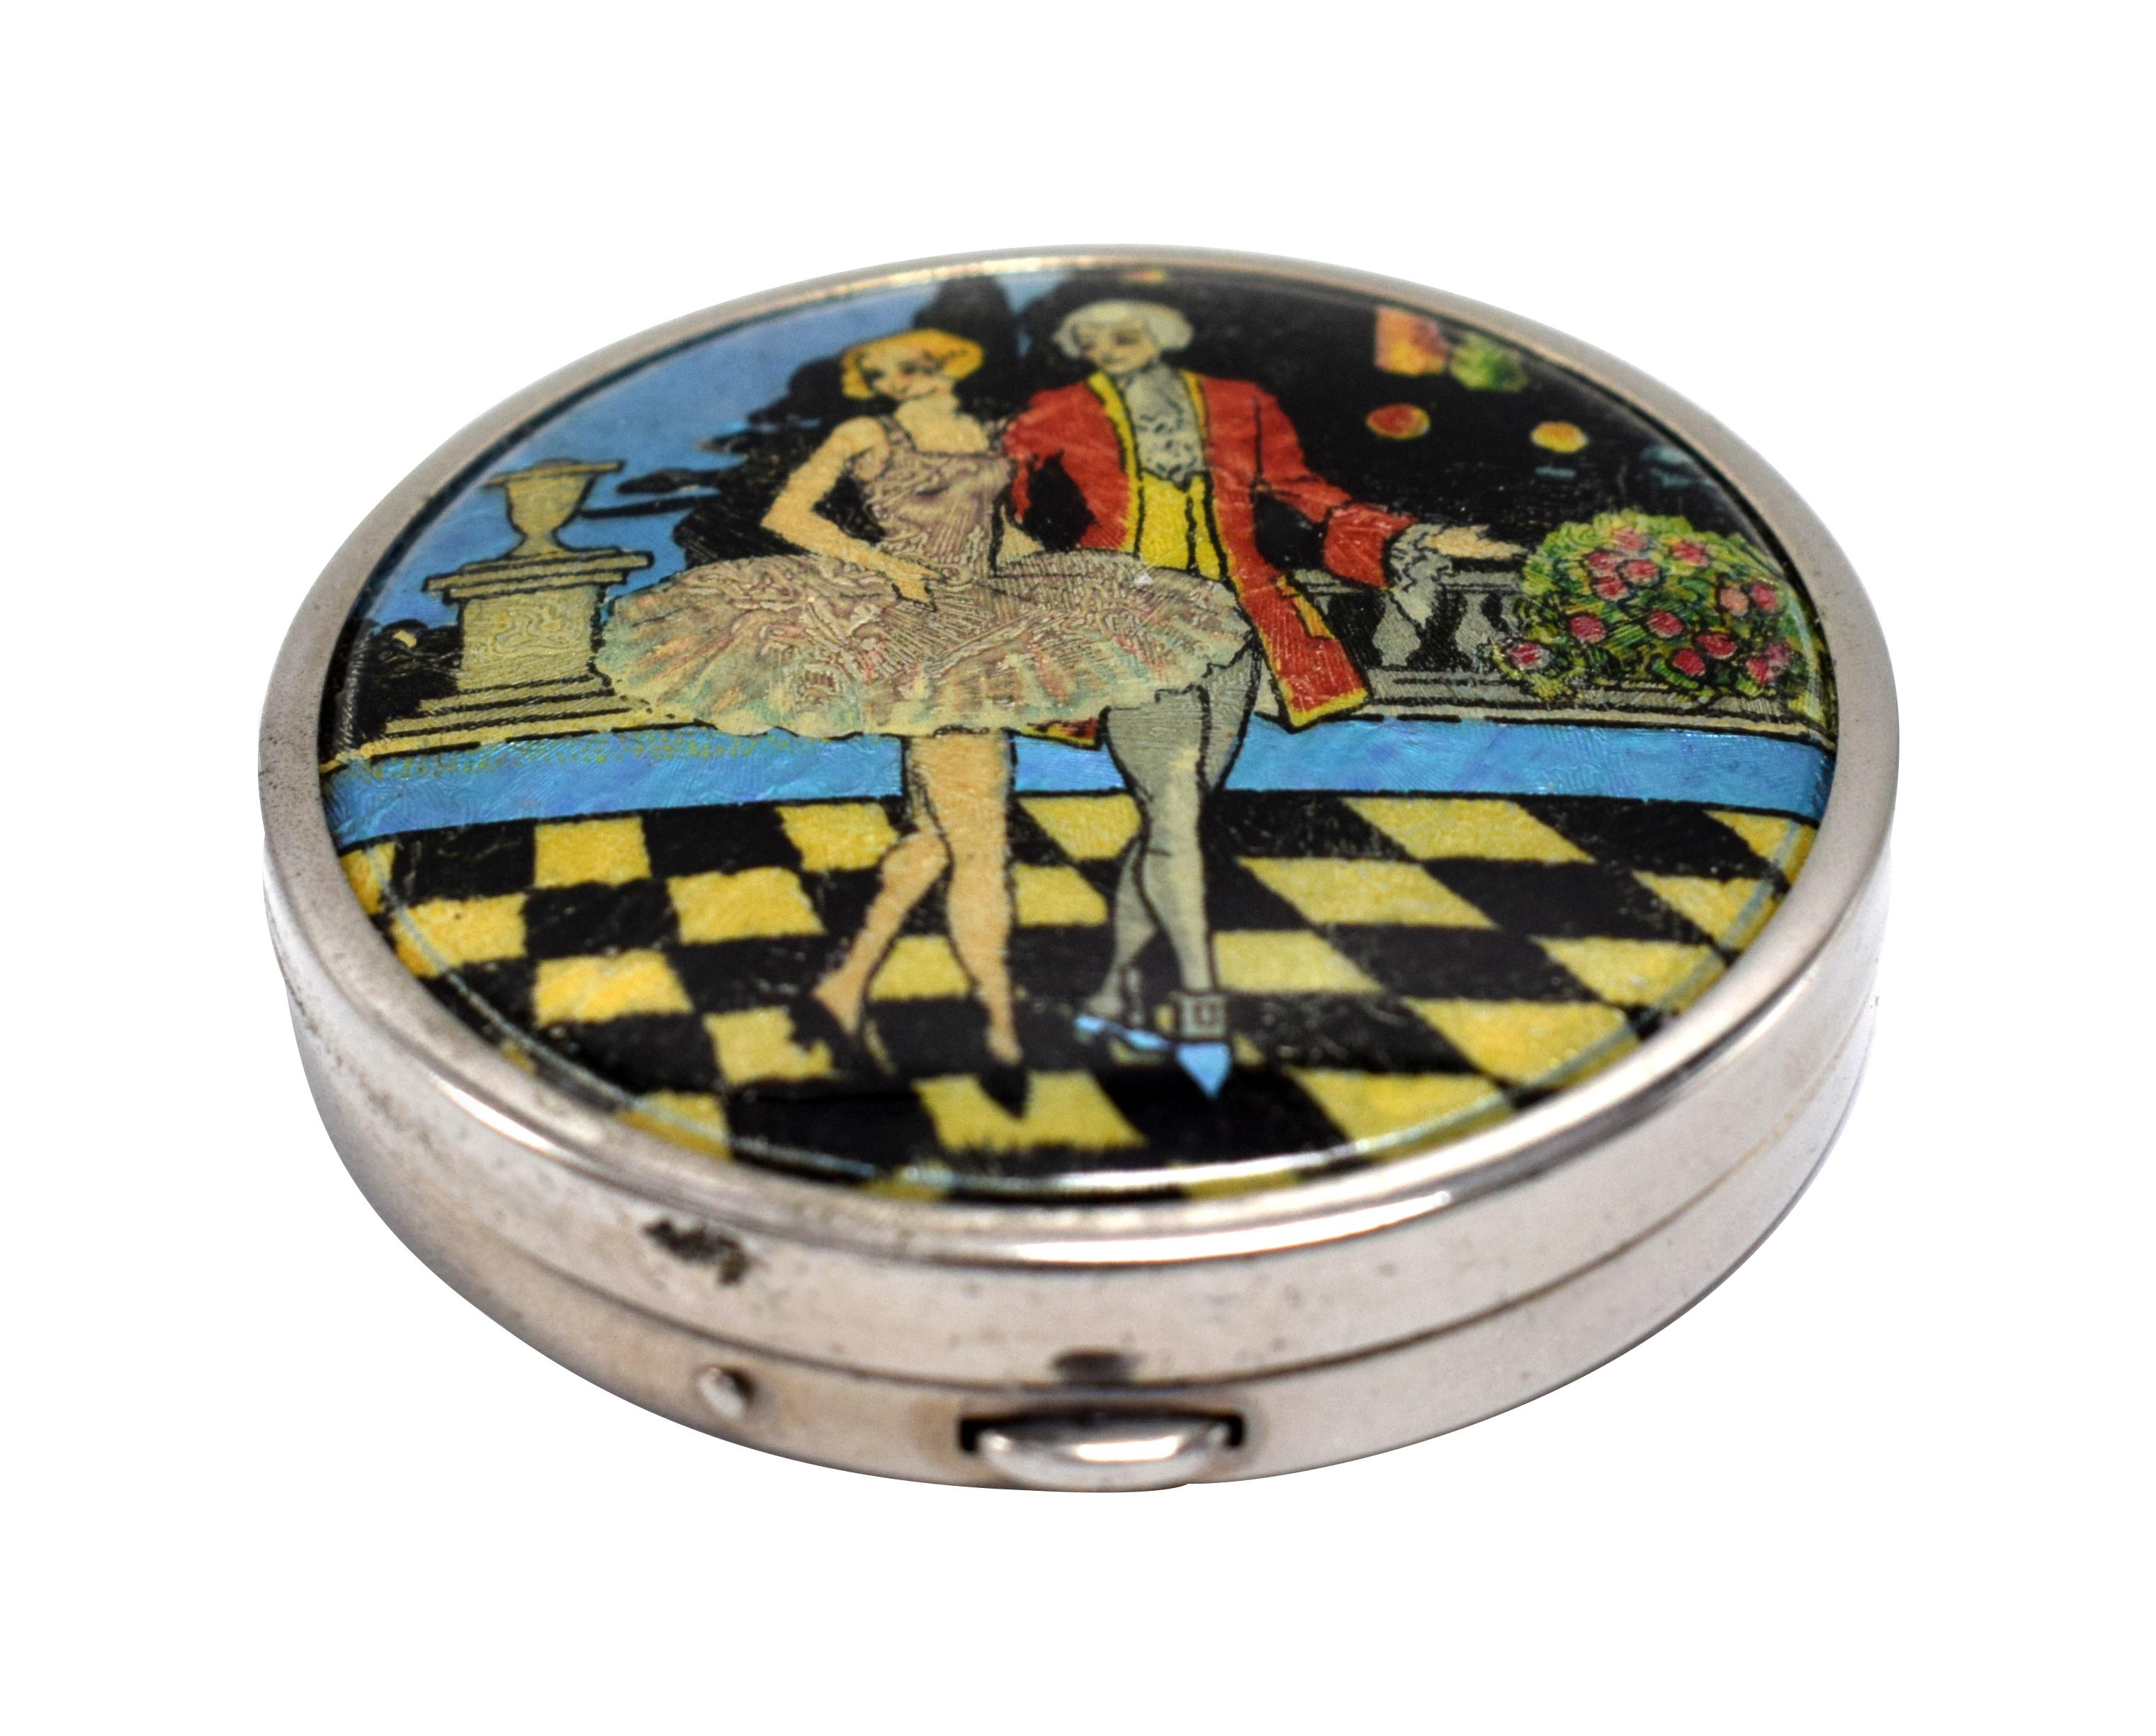 A delightful ladies Art Deco foil 'Tap flap' powder compact originating from England. The back is engine turned with the words ' Ladyn Fayne ' Made In England. The lid depicts a wonderful romantic scene of a young lady with her beau stood holding